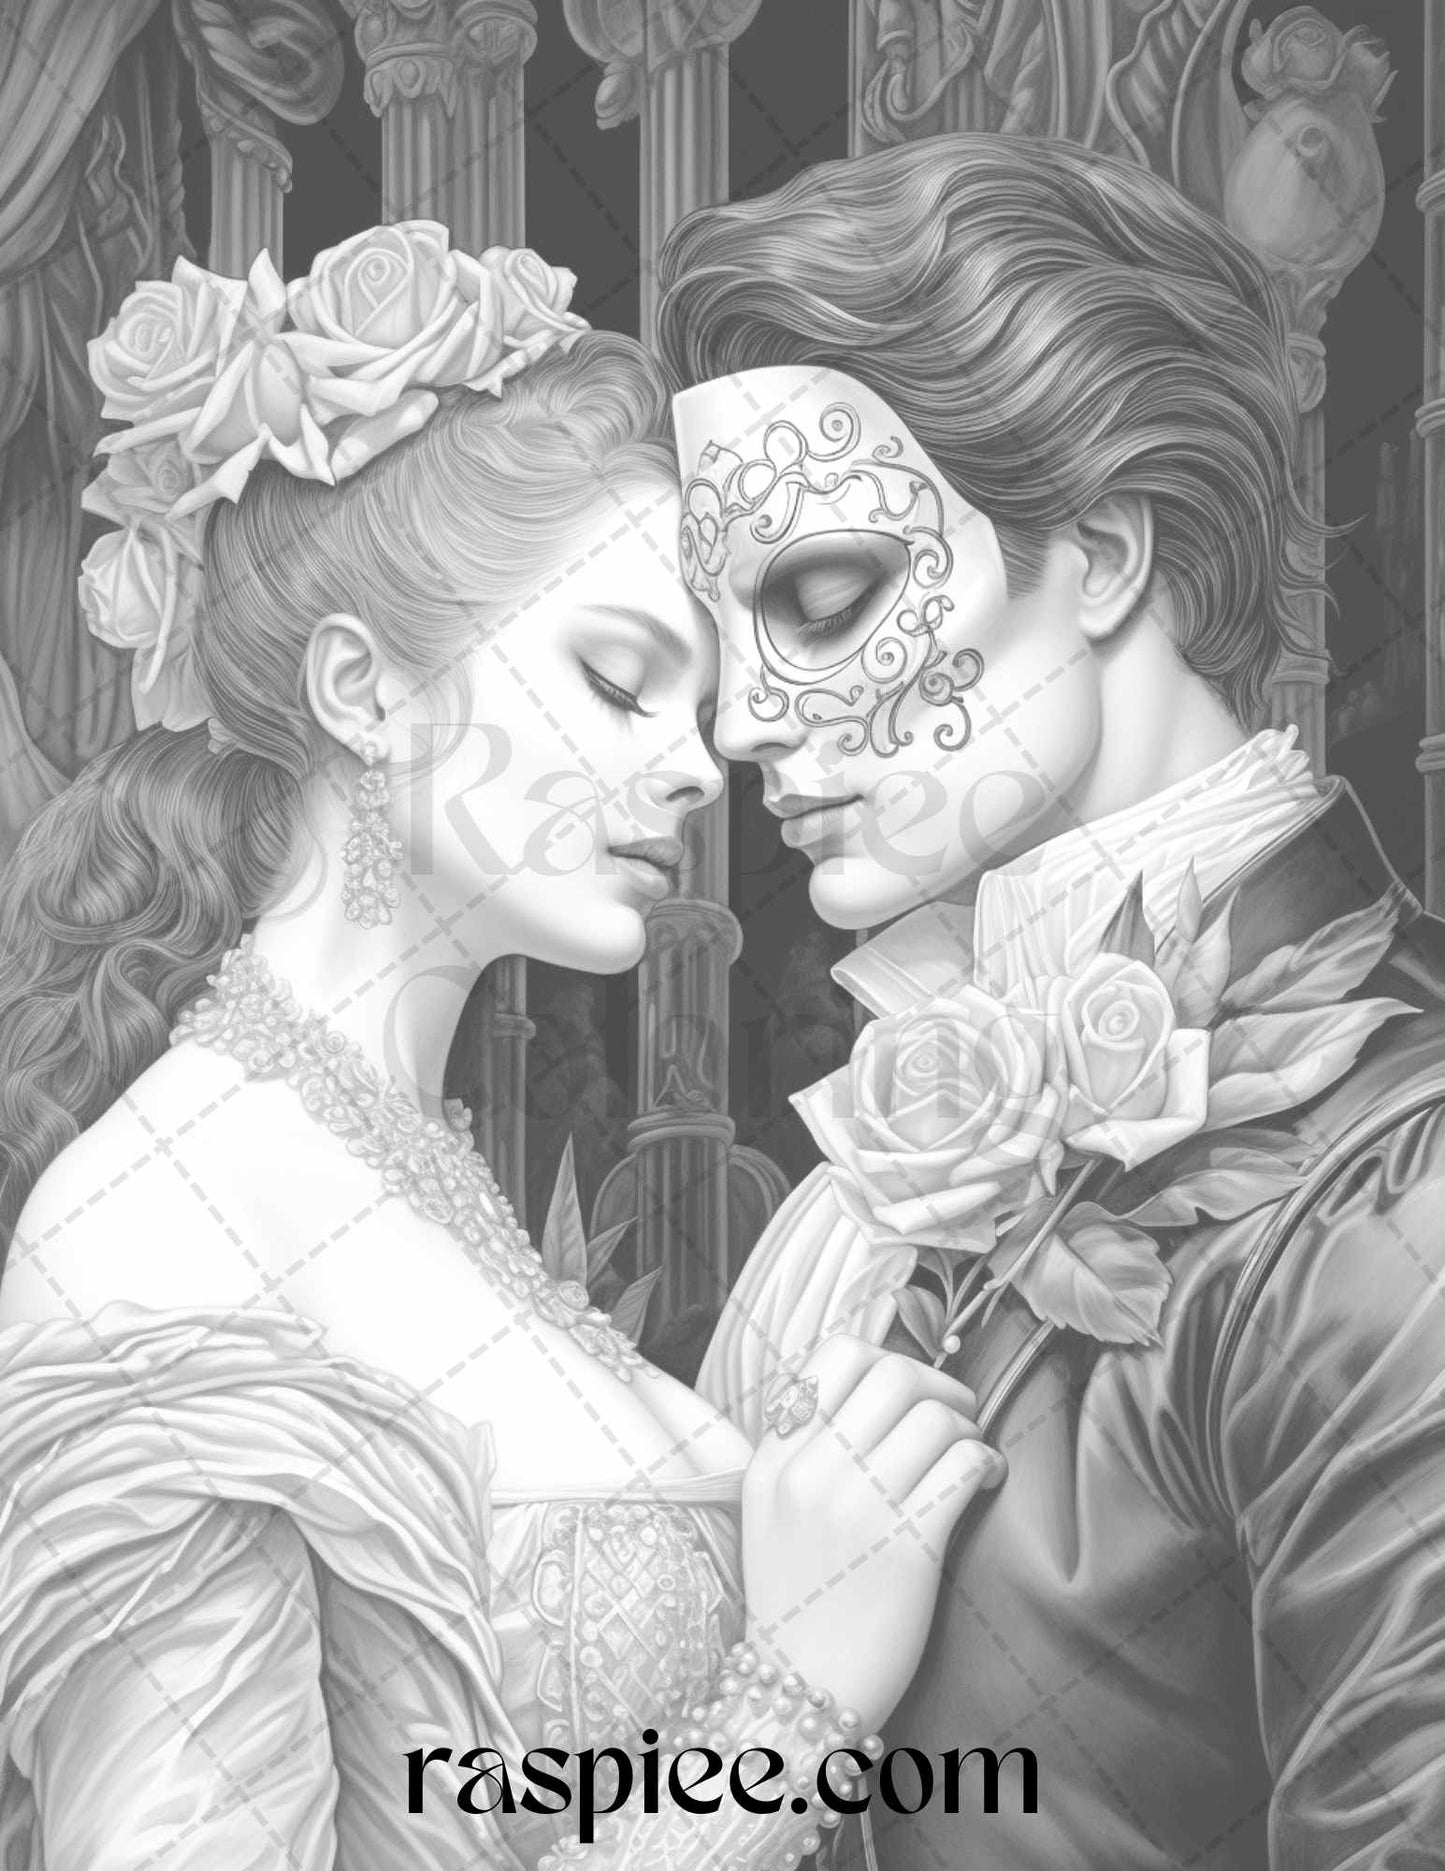 Phantom of the Opera Grayscale Coloring Pages Printable for Adults, PDF File Instant Download - Raspiee Coloring